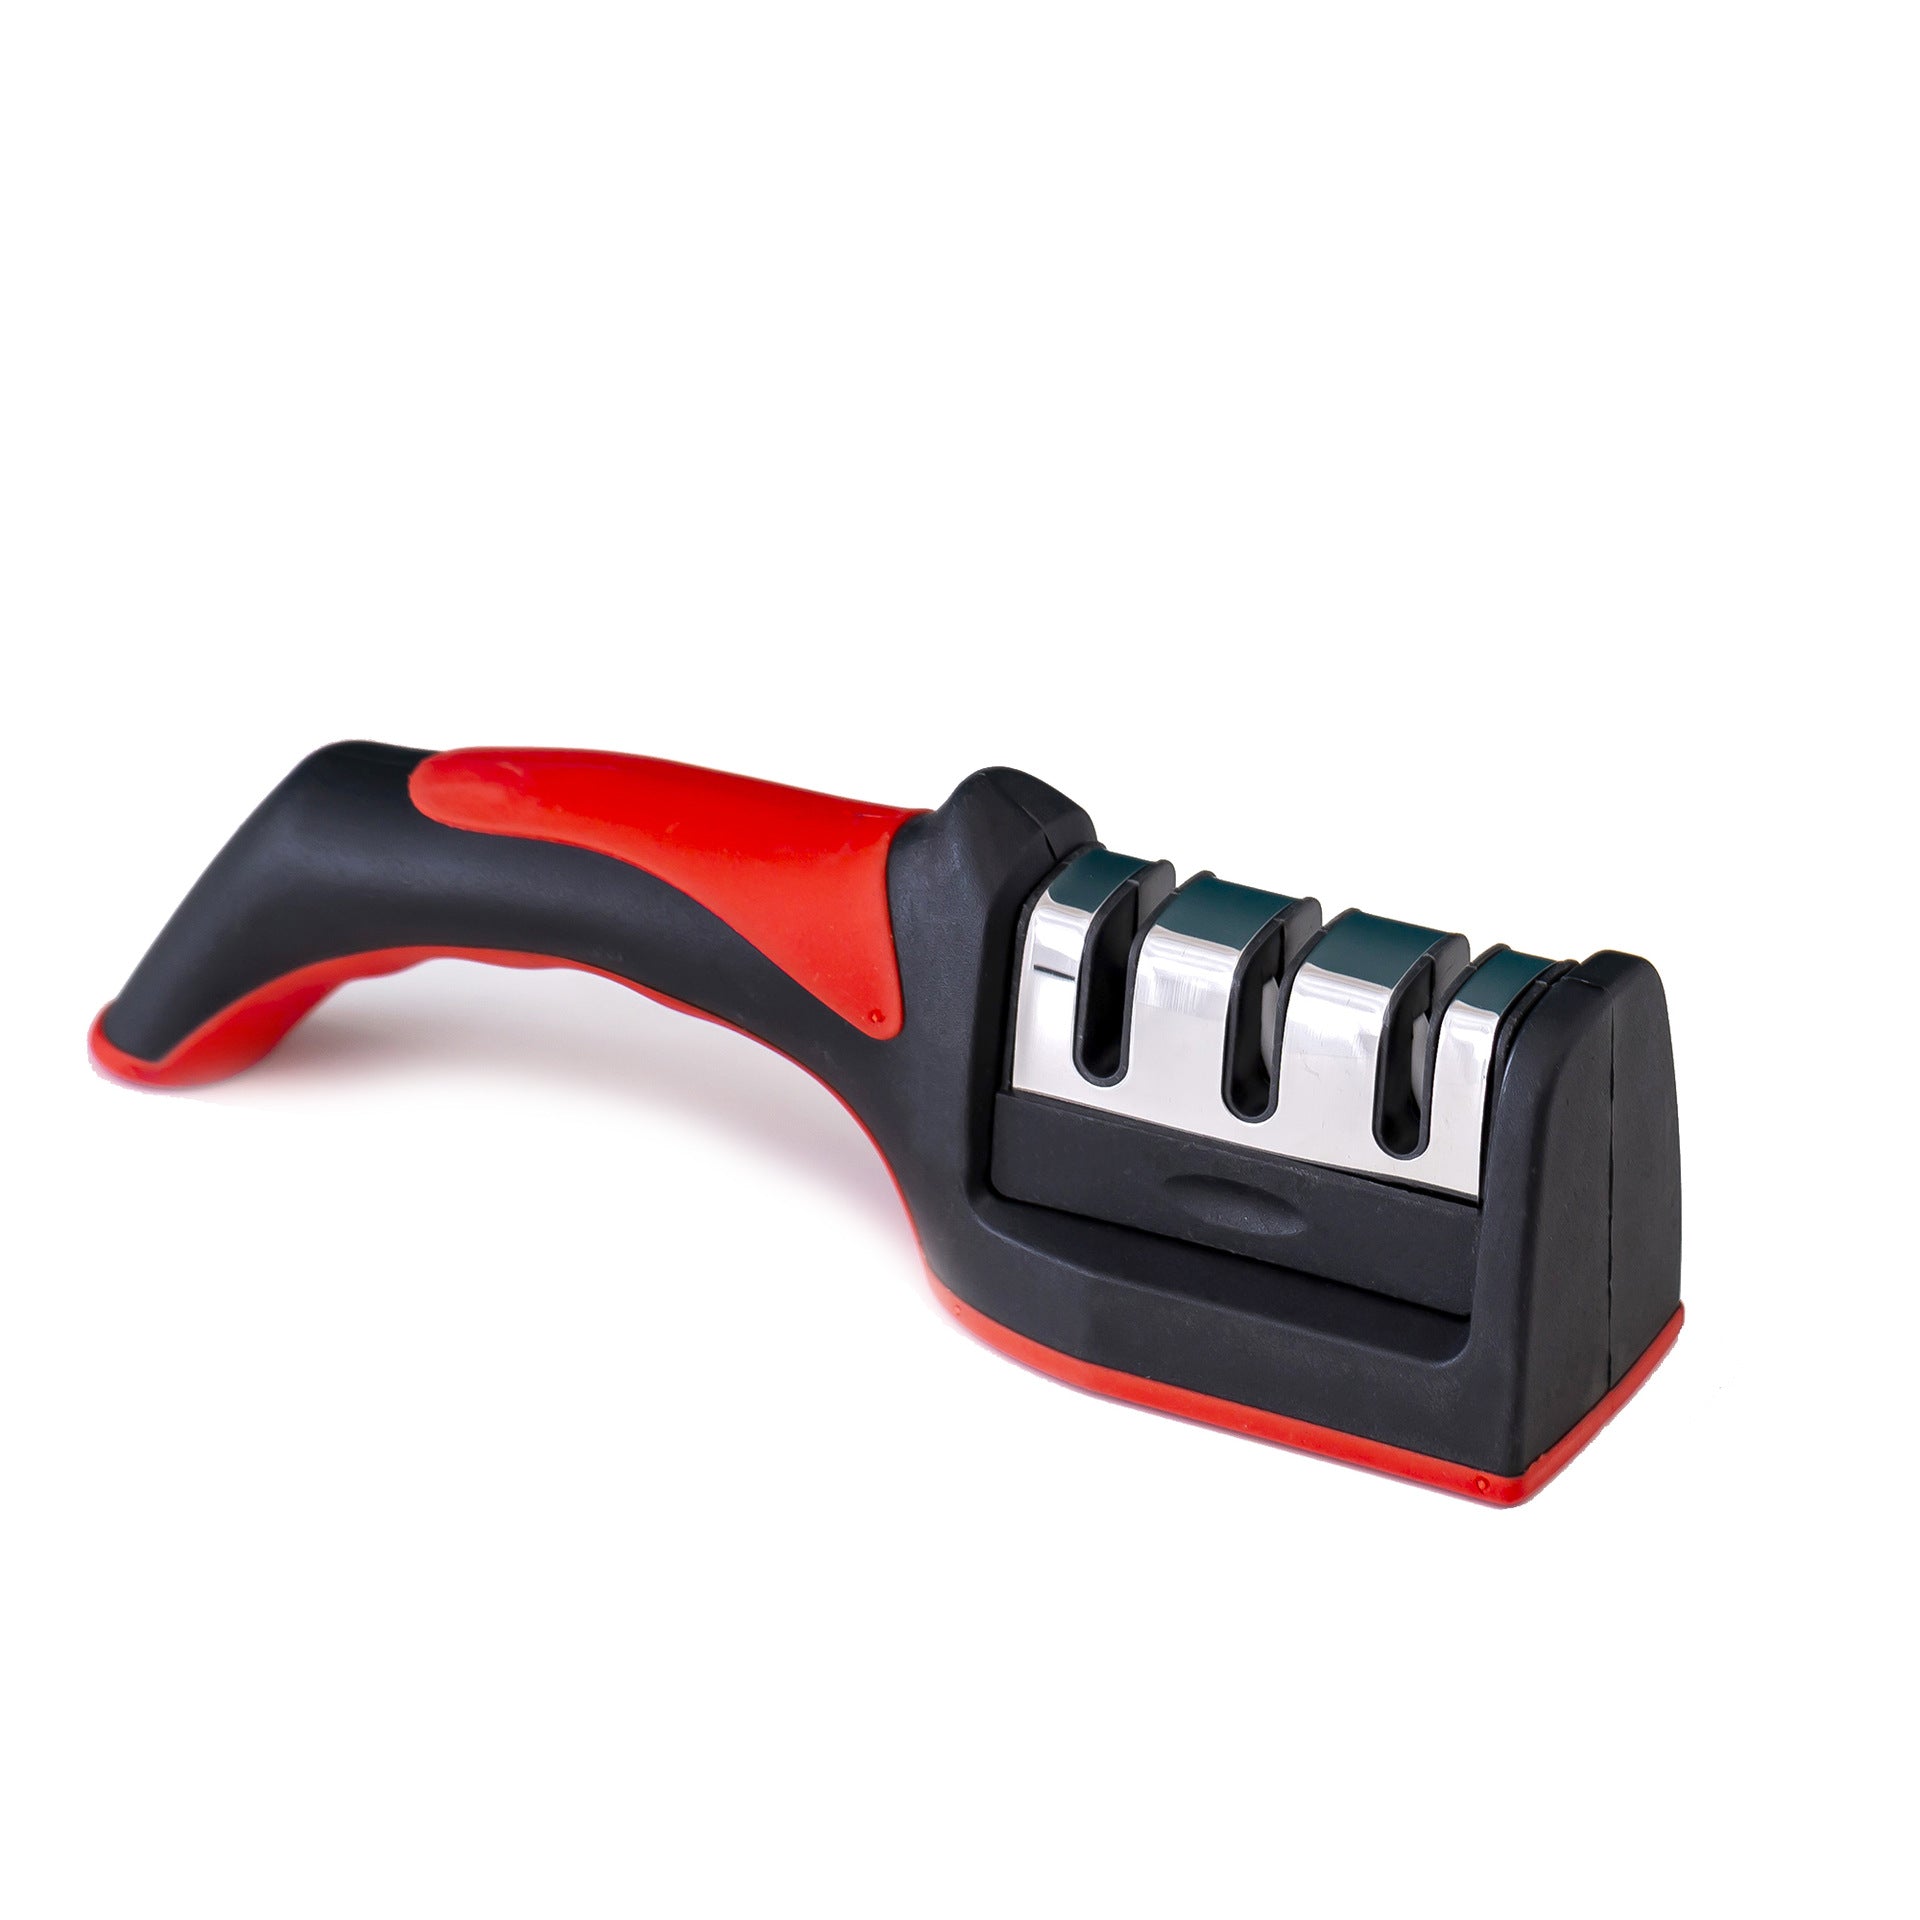 Multifunctional Hand-held Triple-use Sharpening Tool For Home Use